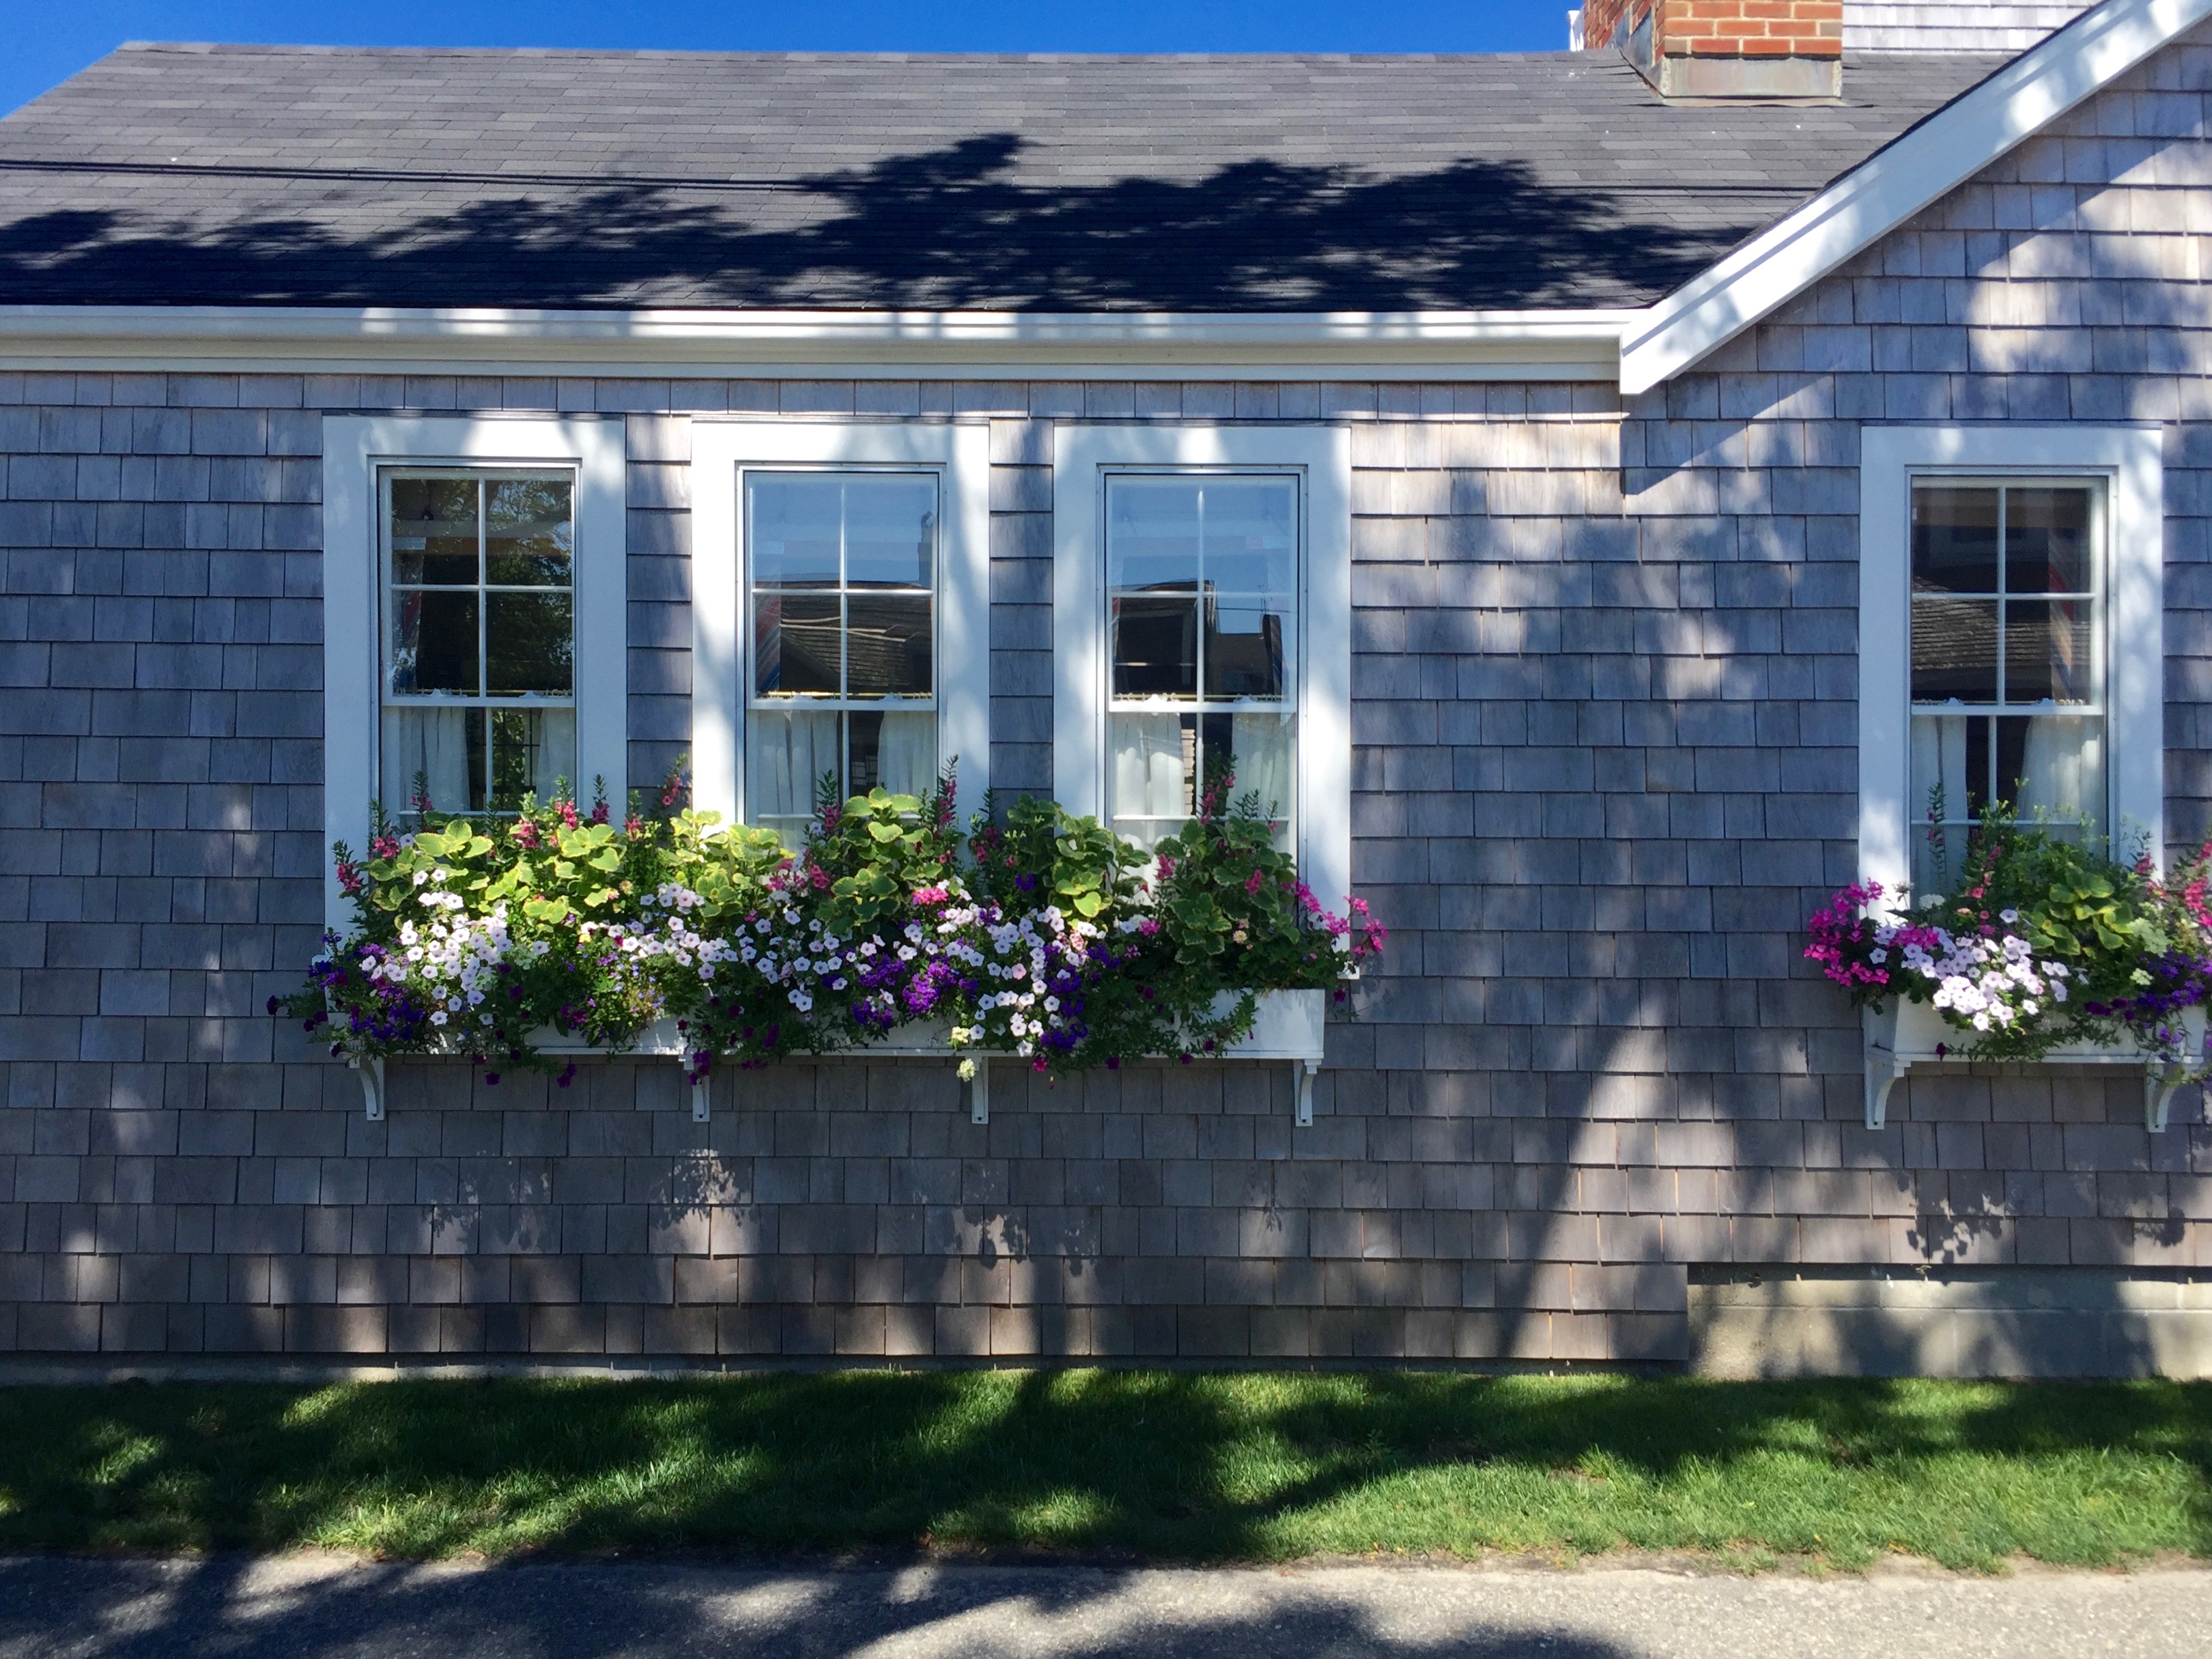 Photos of Nantucket by Christina Dandar for The Potted Boxwood 5